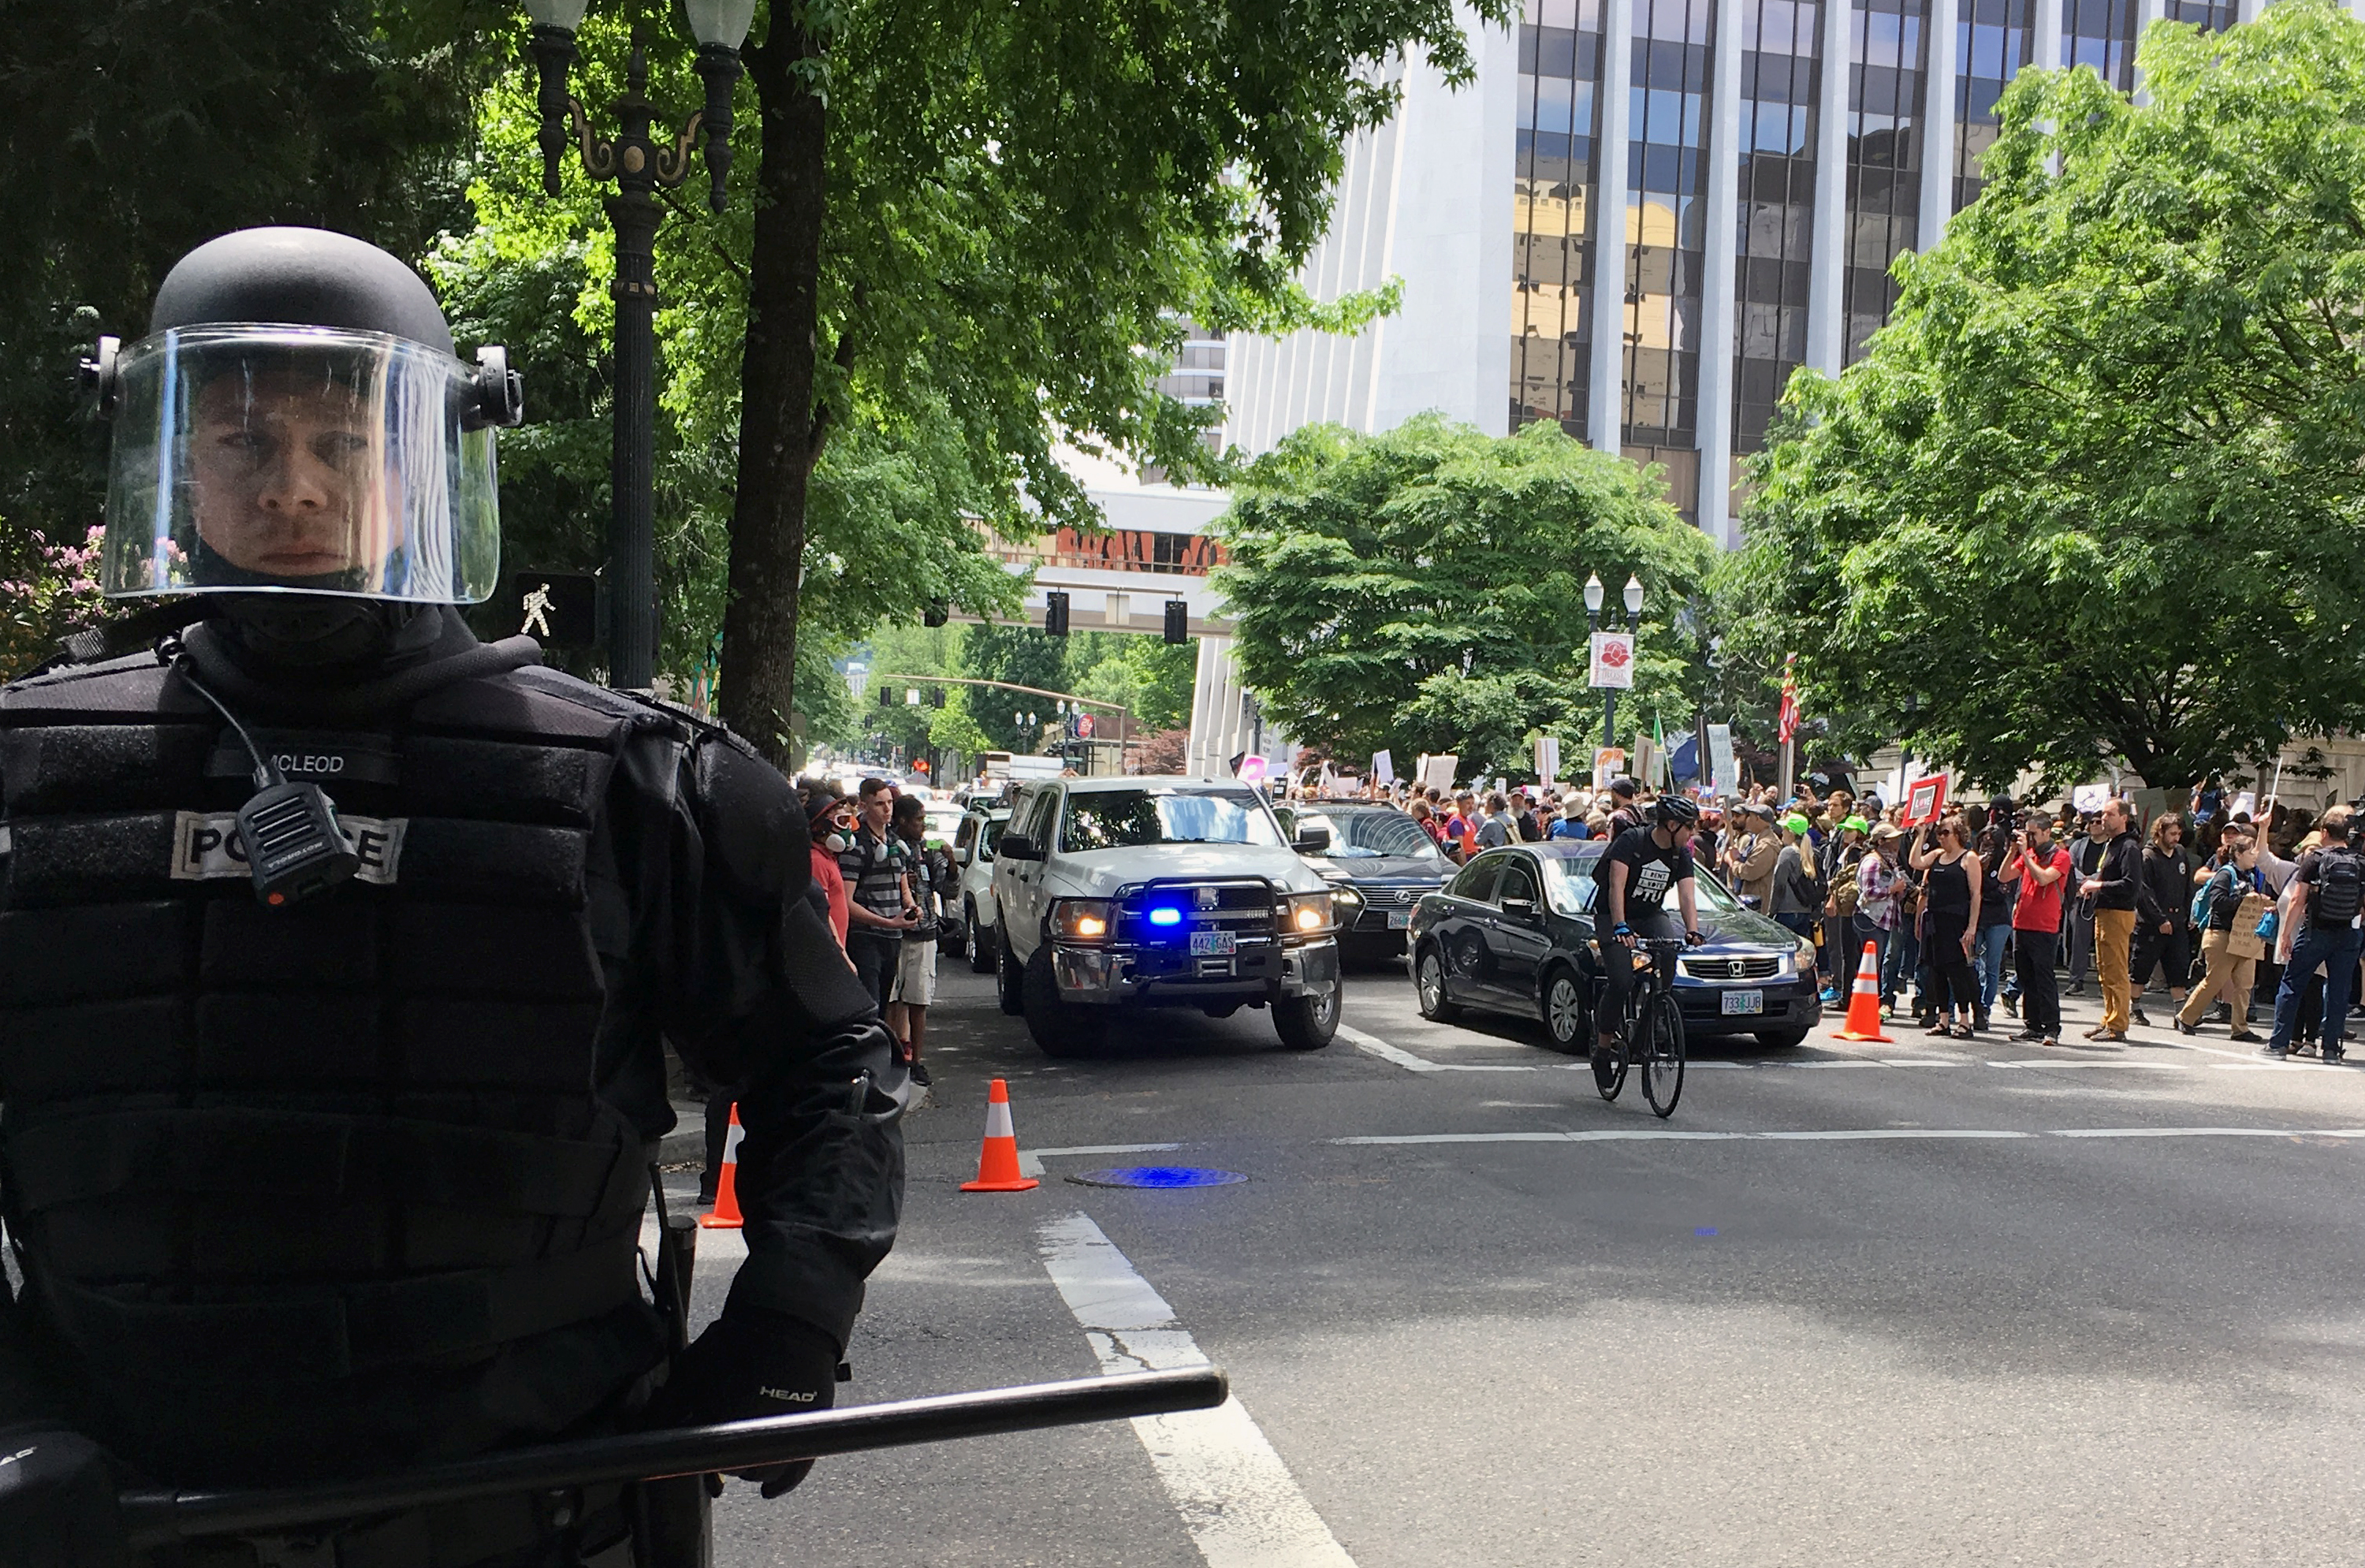 Day of Portland demonstrations marked by arrests, clashes - The Blade3000 x 1989